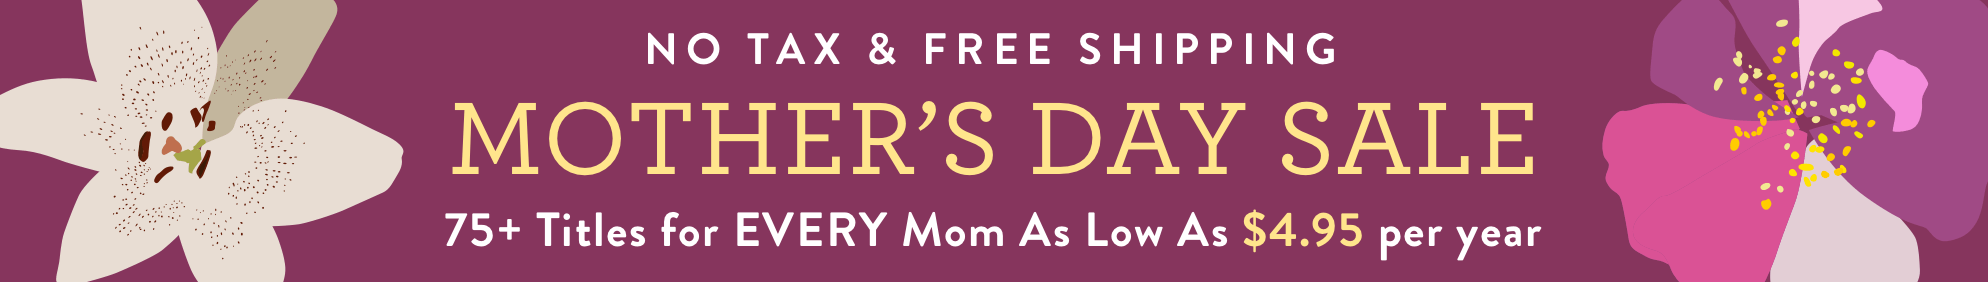 Mother's Day Sale 2017